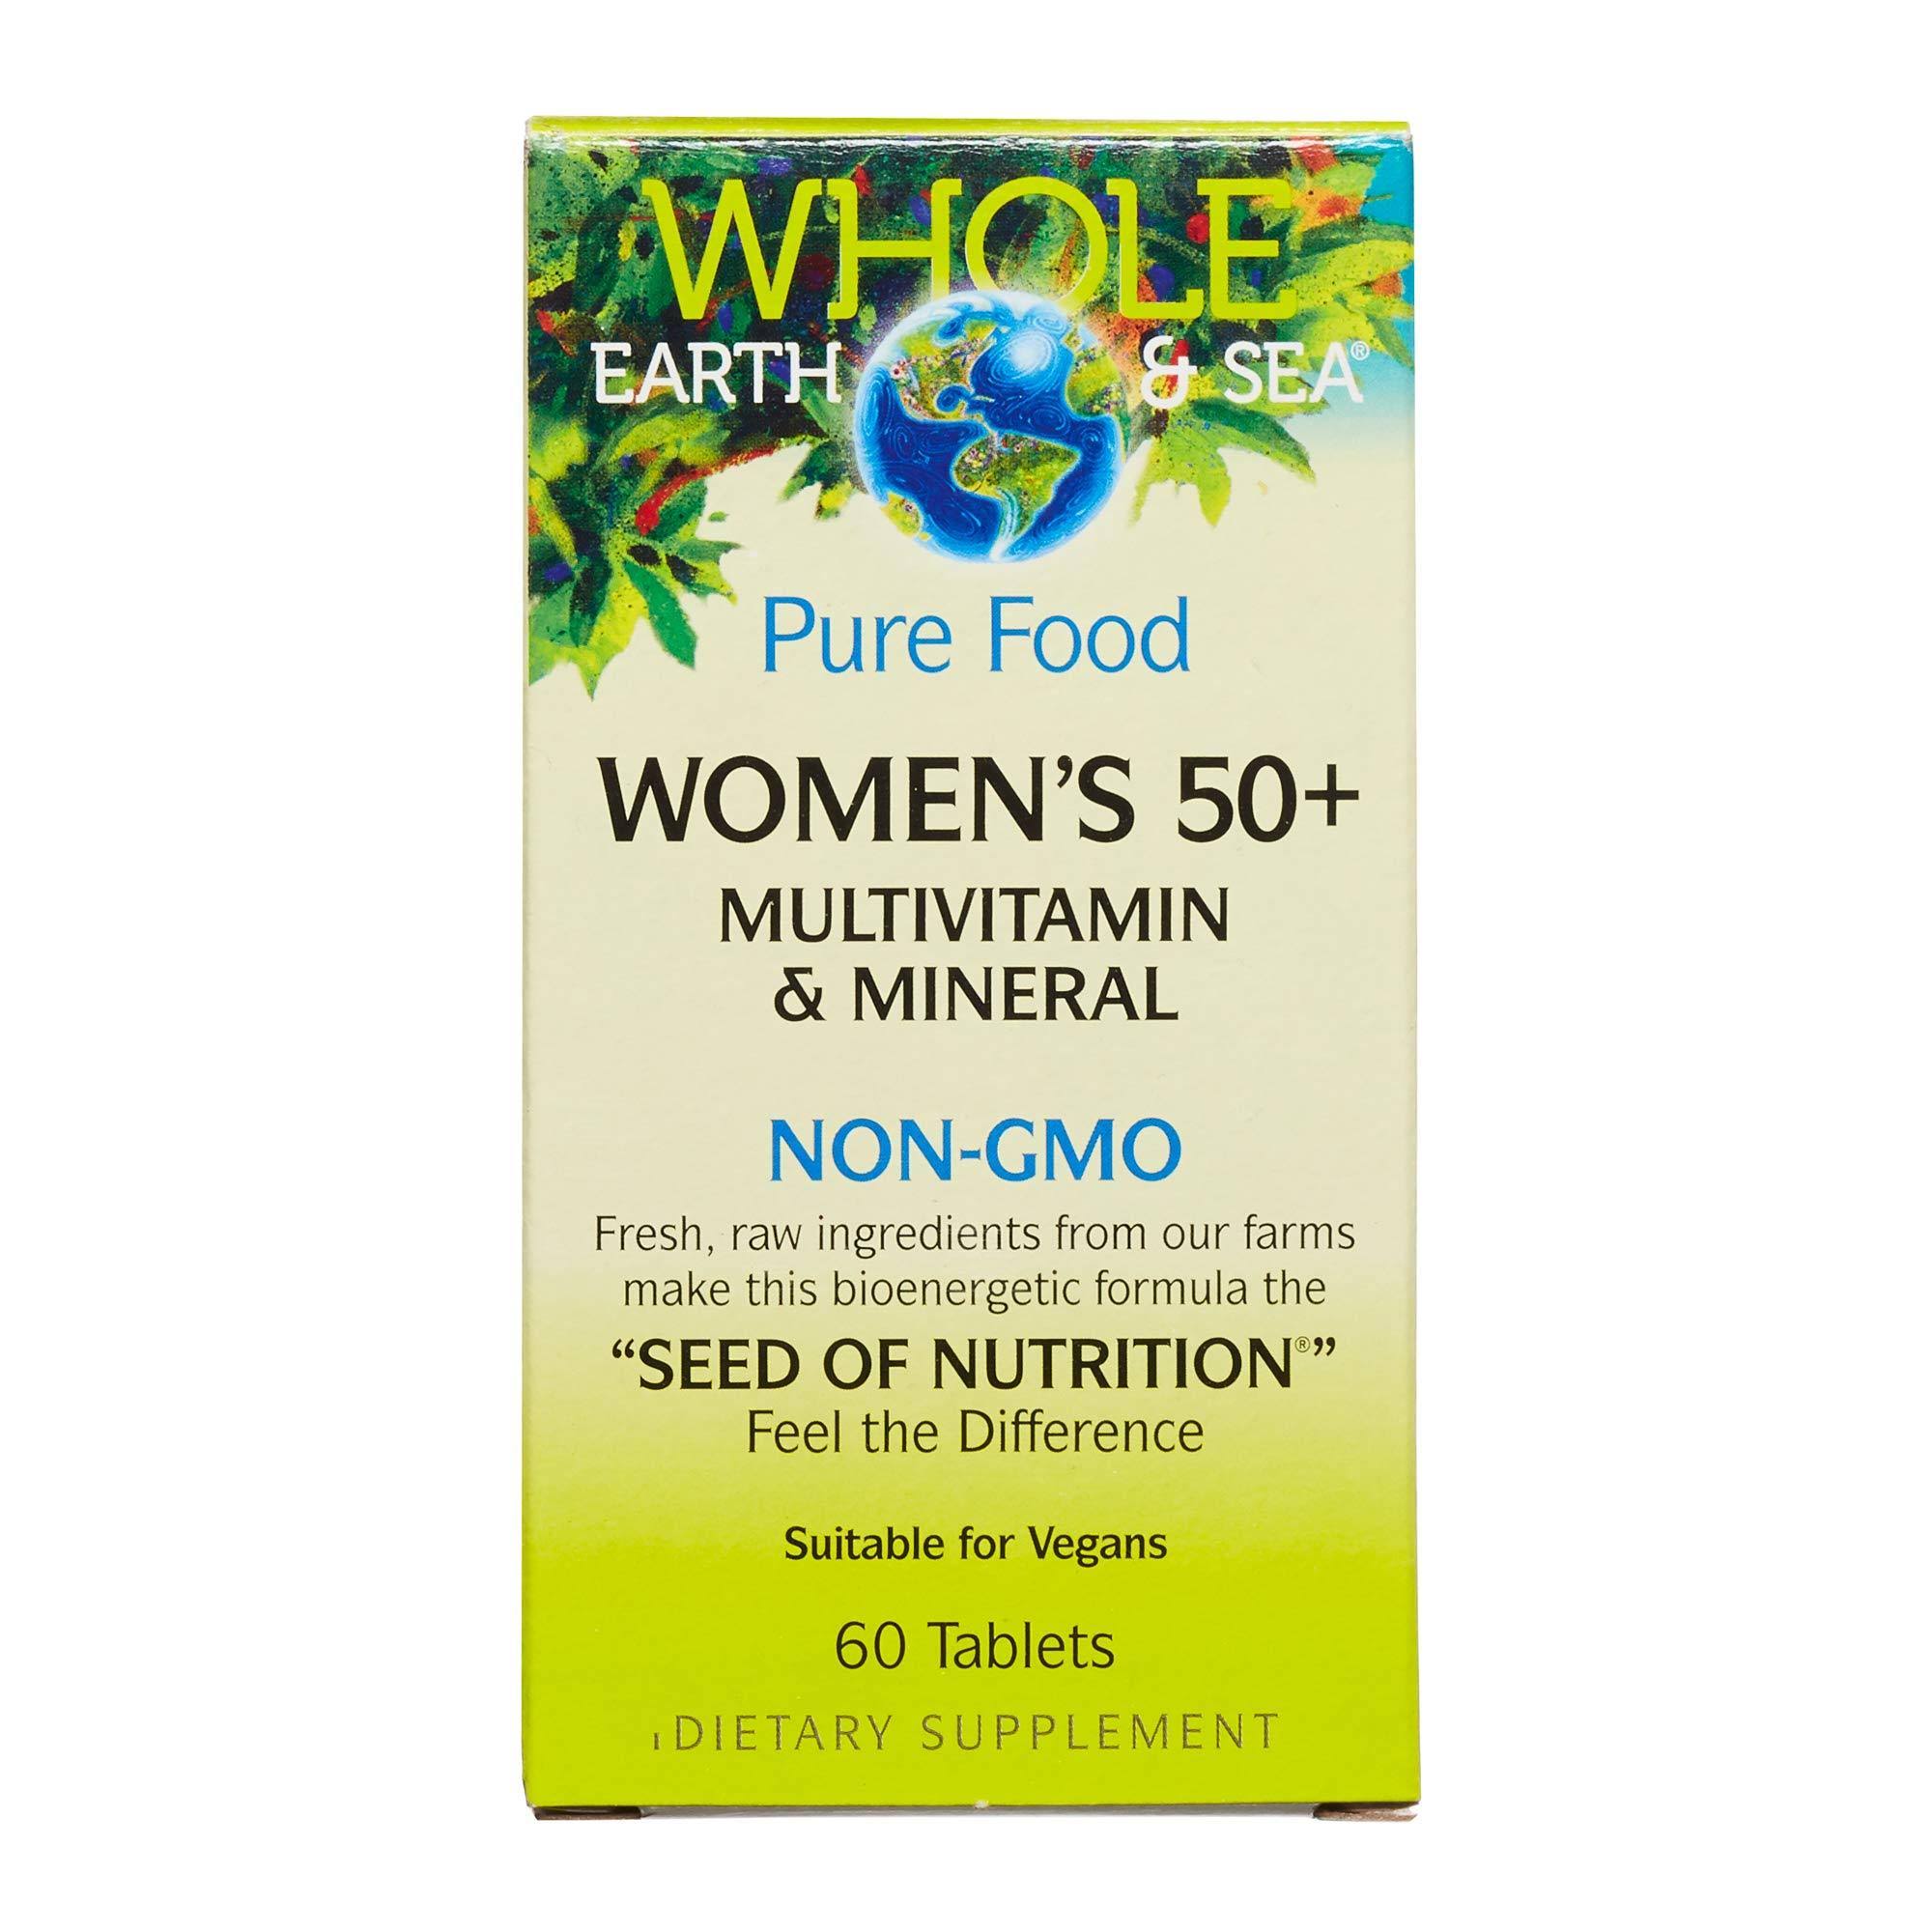 Whole Earth And Sea Women's 50+ Multivitamin And Mineral - 60 Tablets